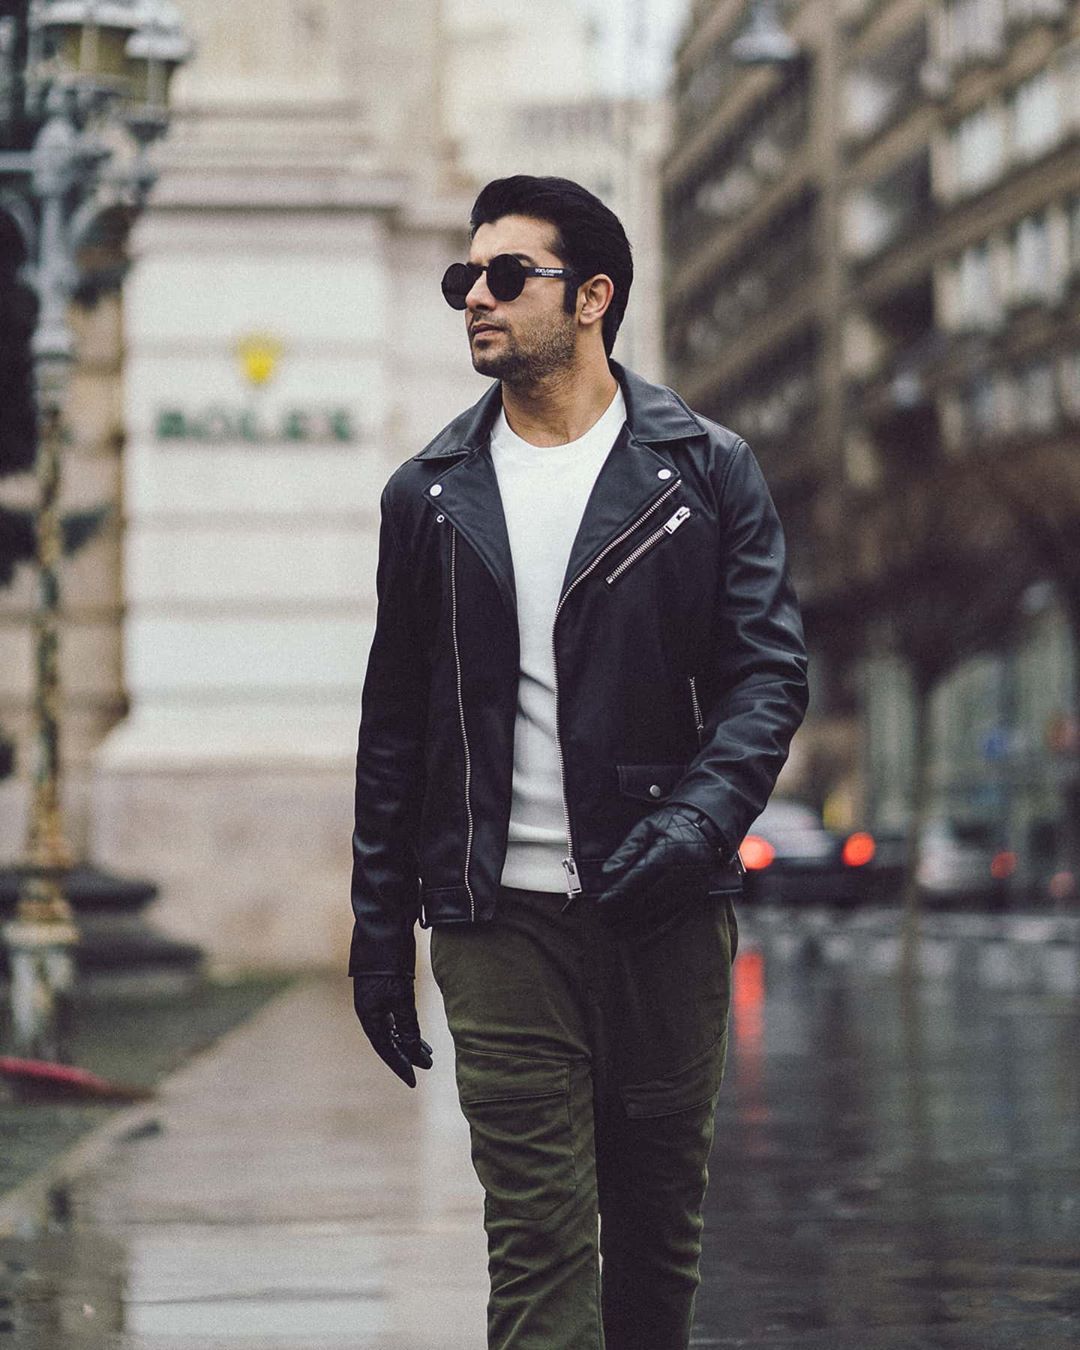 Sharad Malhotra Once Felt He Would Be The Next Shah Rukh Khan: I Had Already Stopped Thinking Of Doing TV Shows